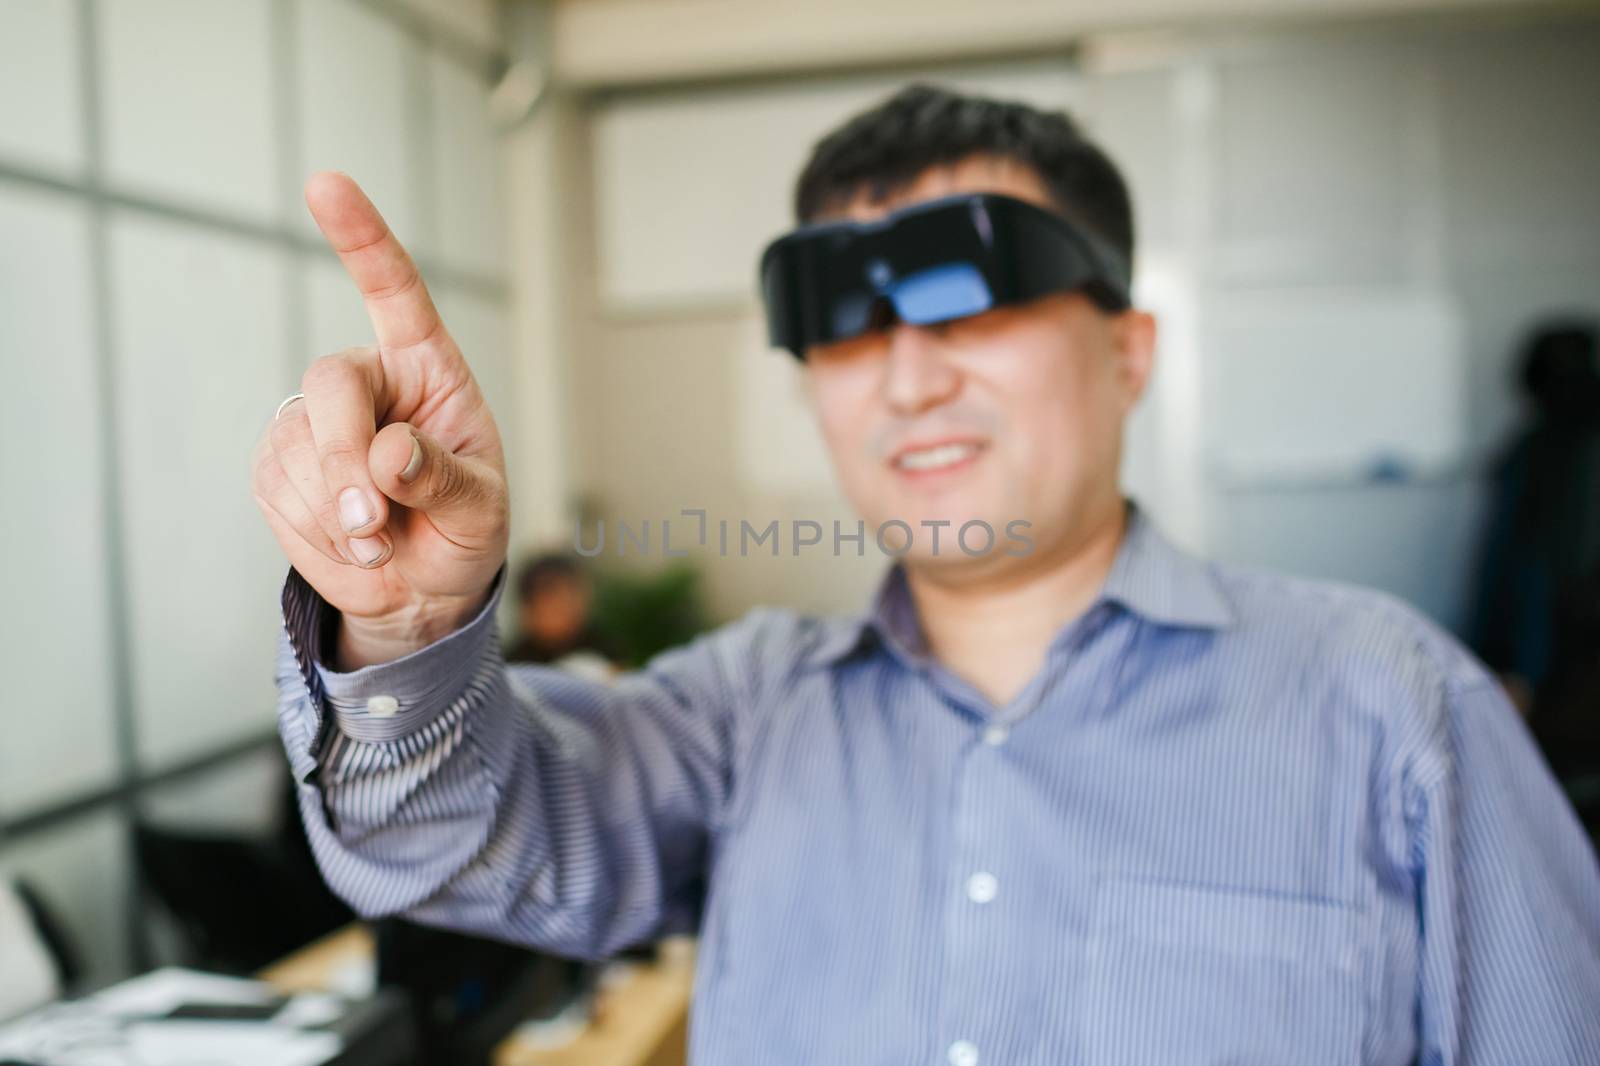 A man in a virtual reality helmet points finger up in the air inside the office premises.